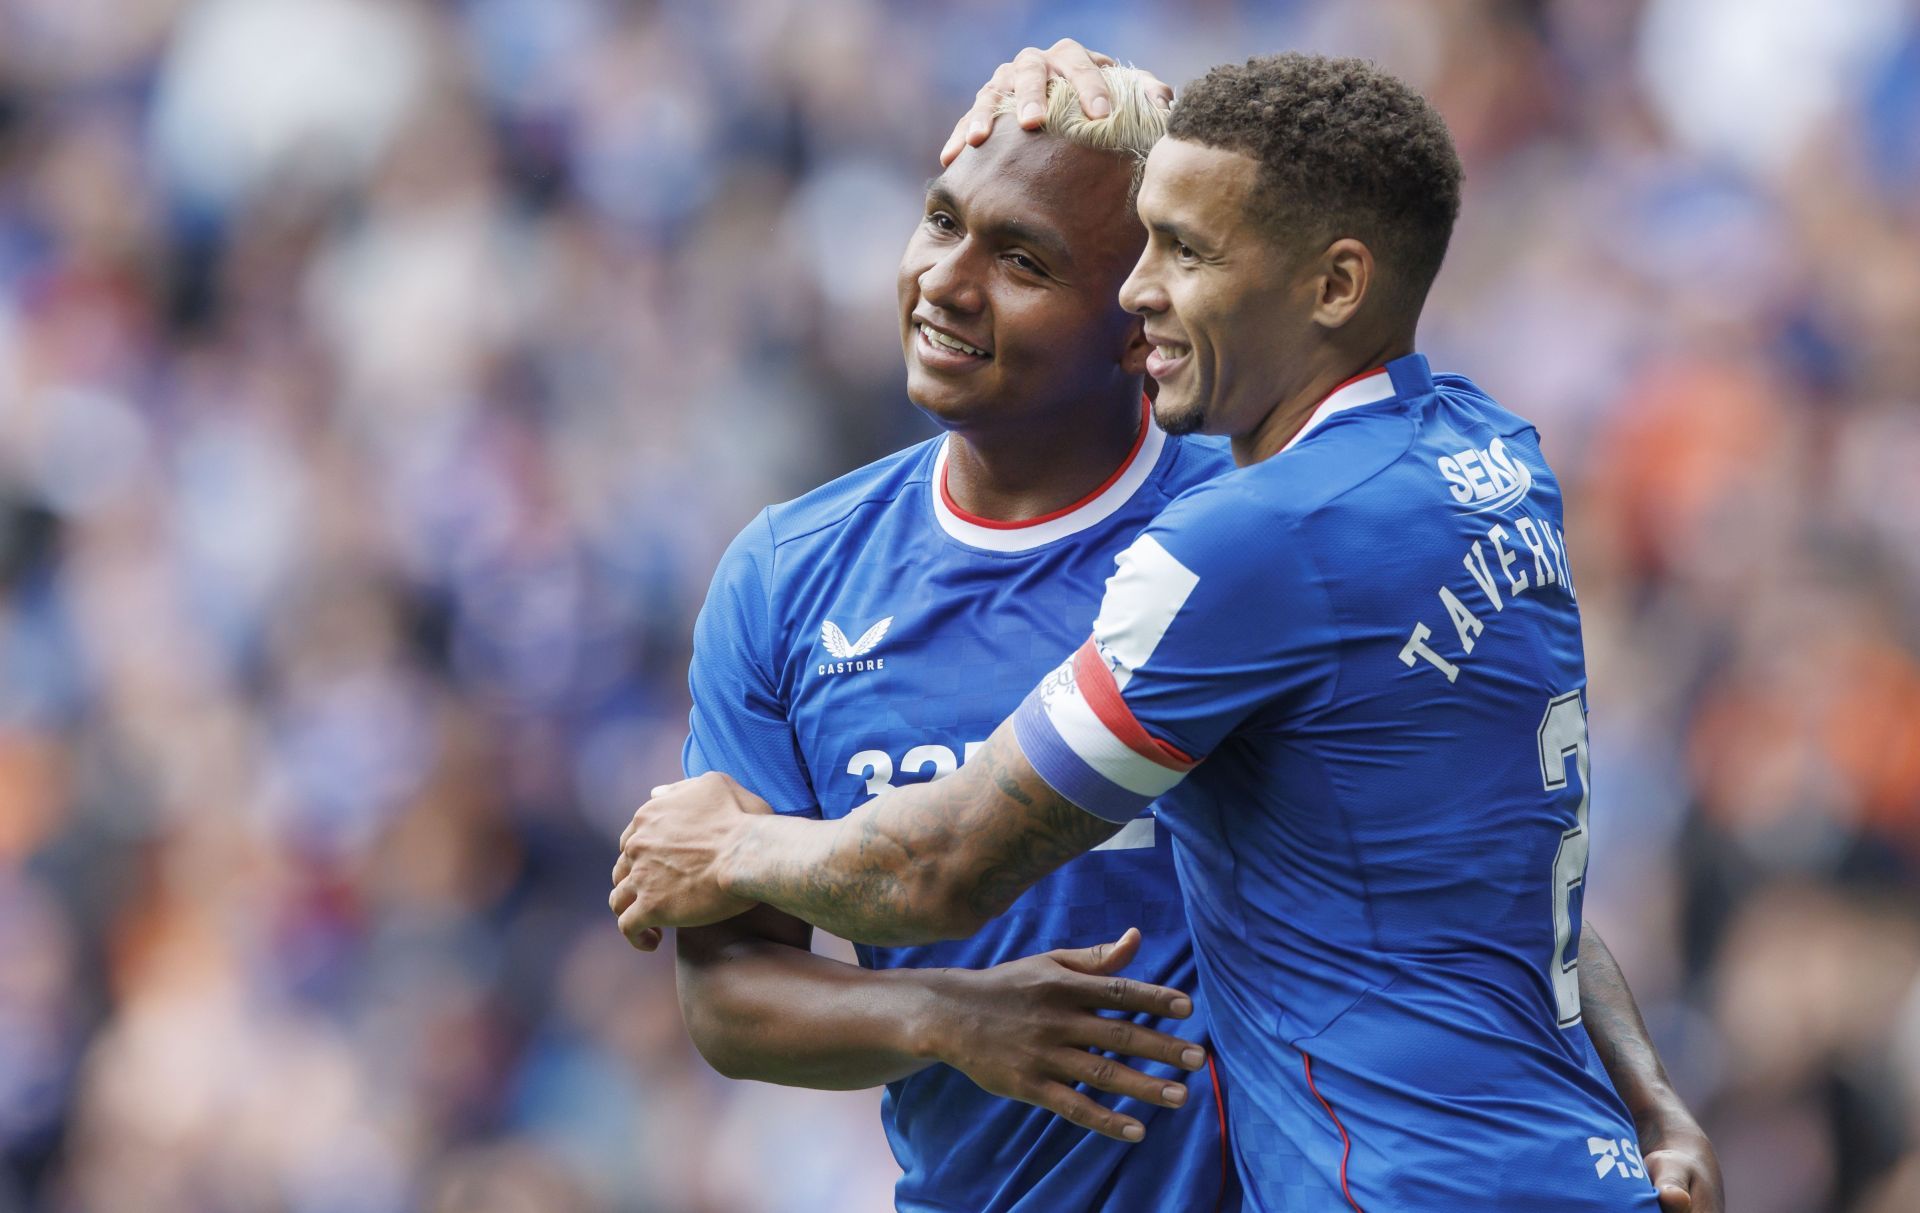 Rangers need to overcome a two-goal deficit against Union Saint-Gilloise on Tuesday